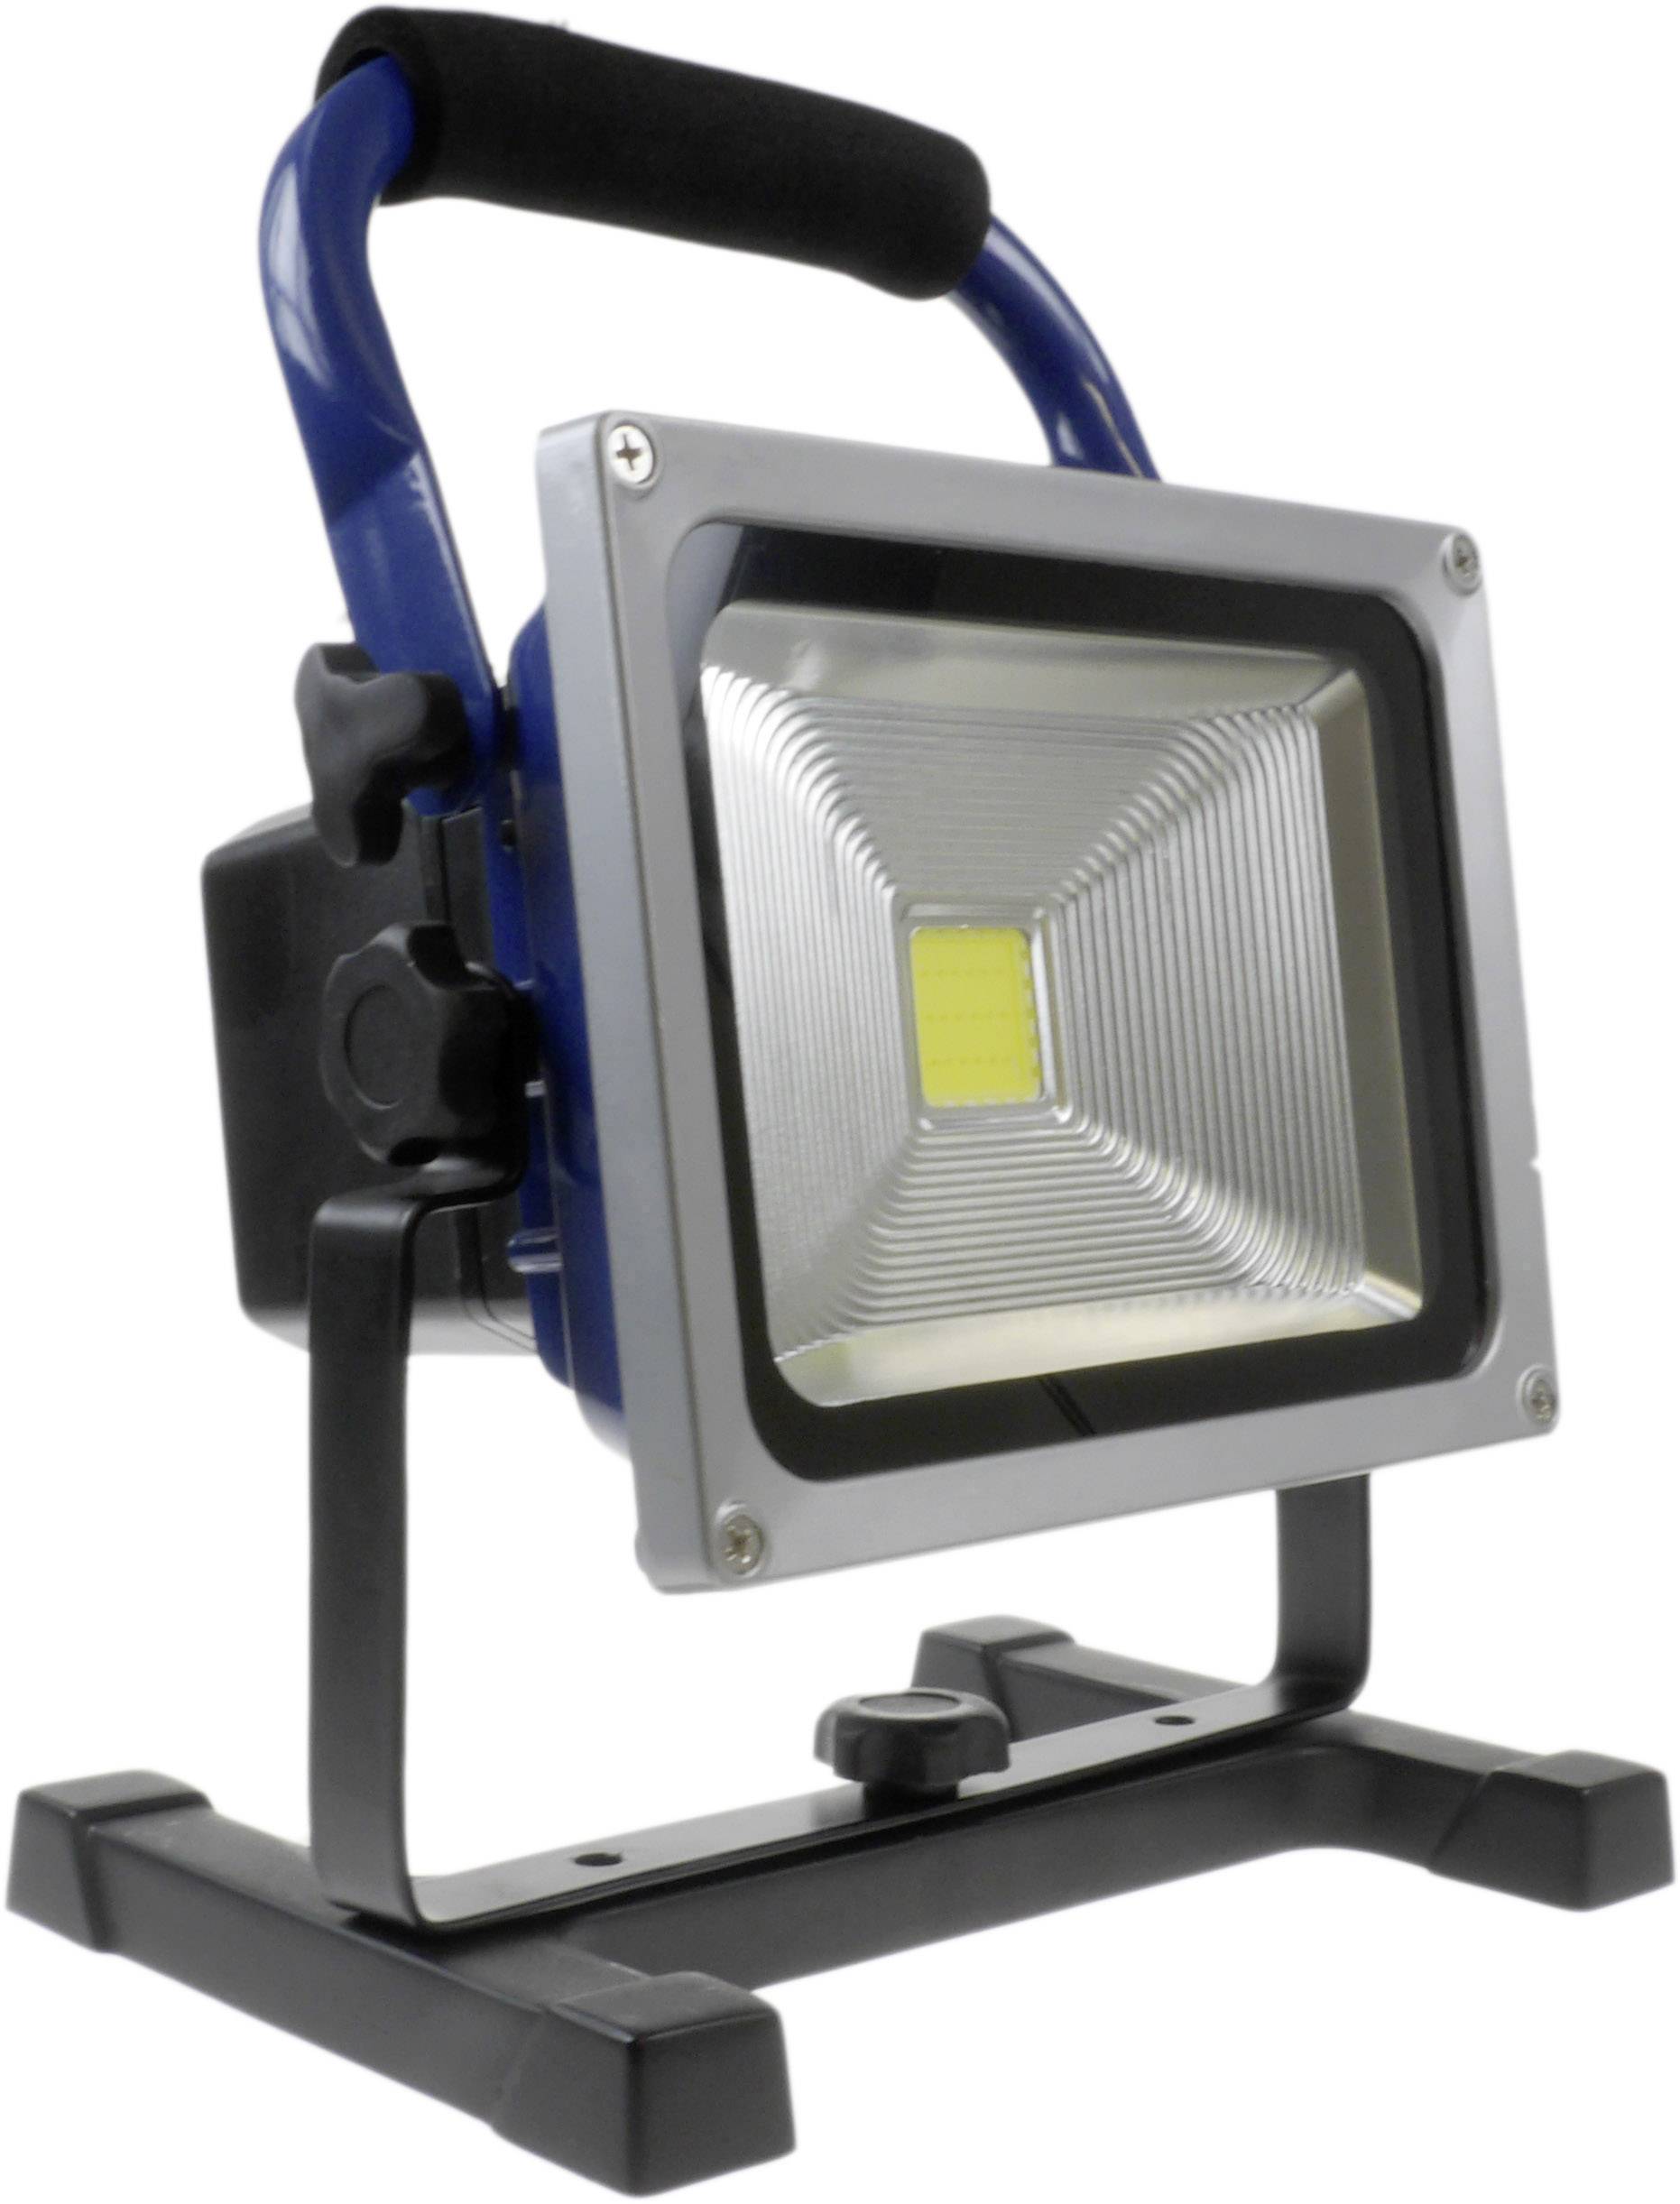 XCell 140966 Work W LED (monochrome) Work light rechargeable W 1600 lm | Conrad.com